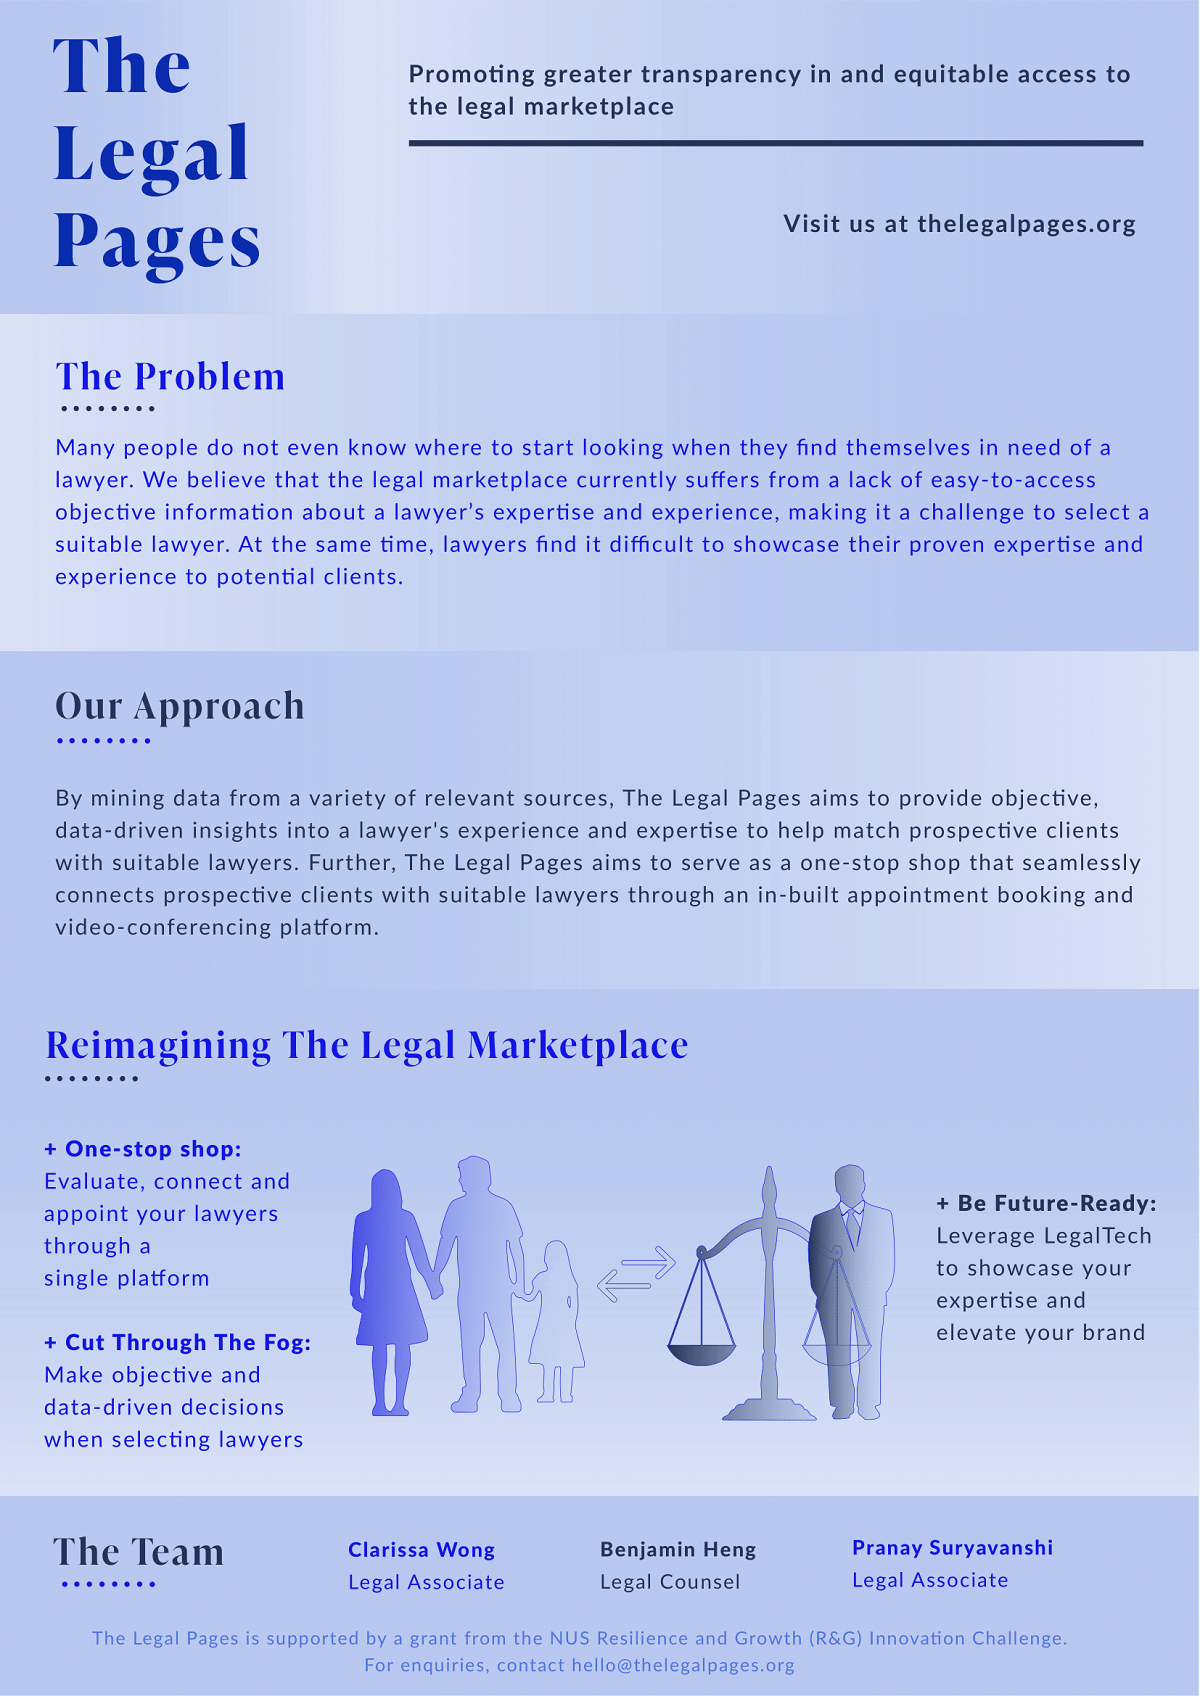 R193 - The Legal Pages